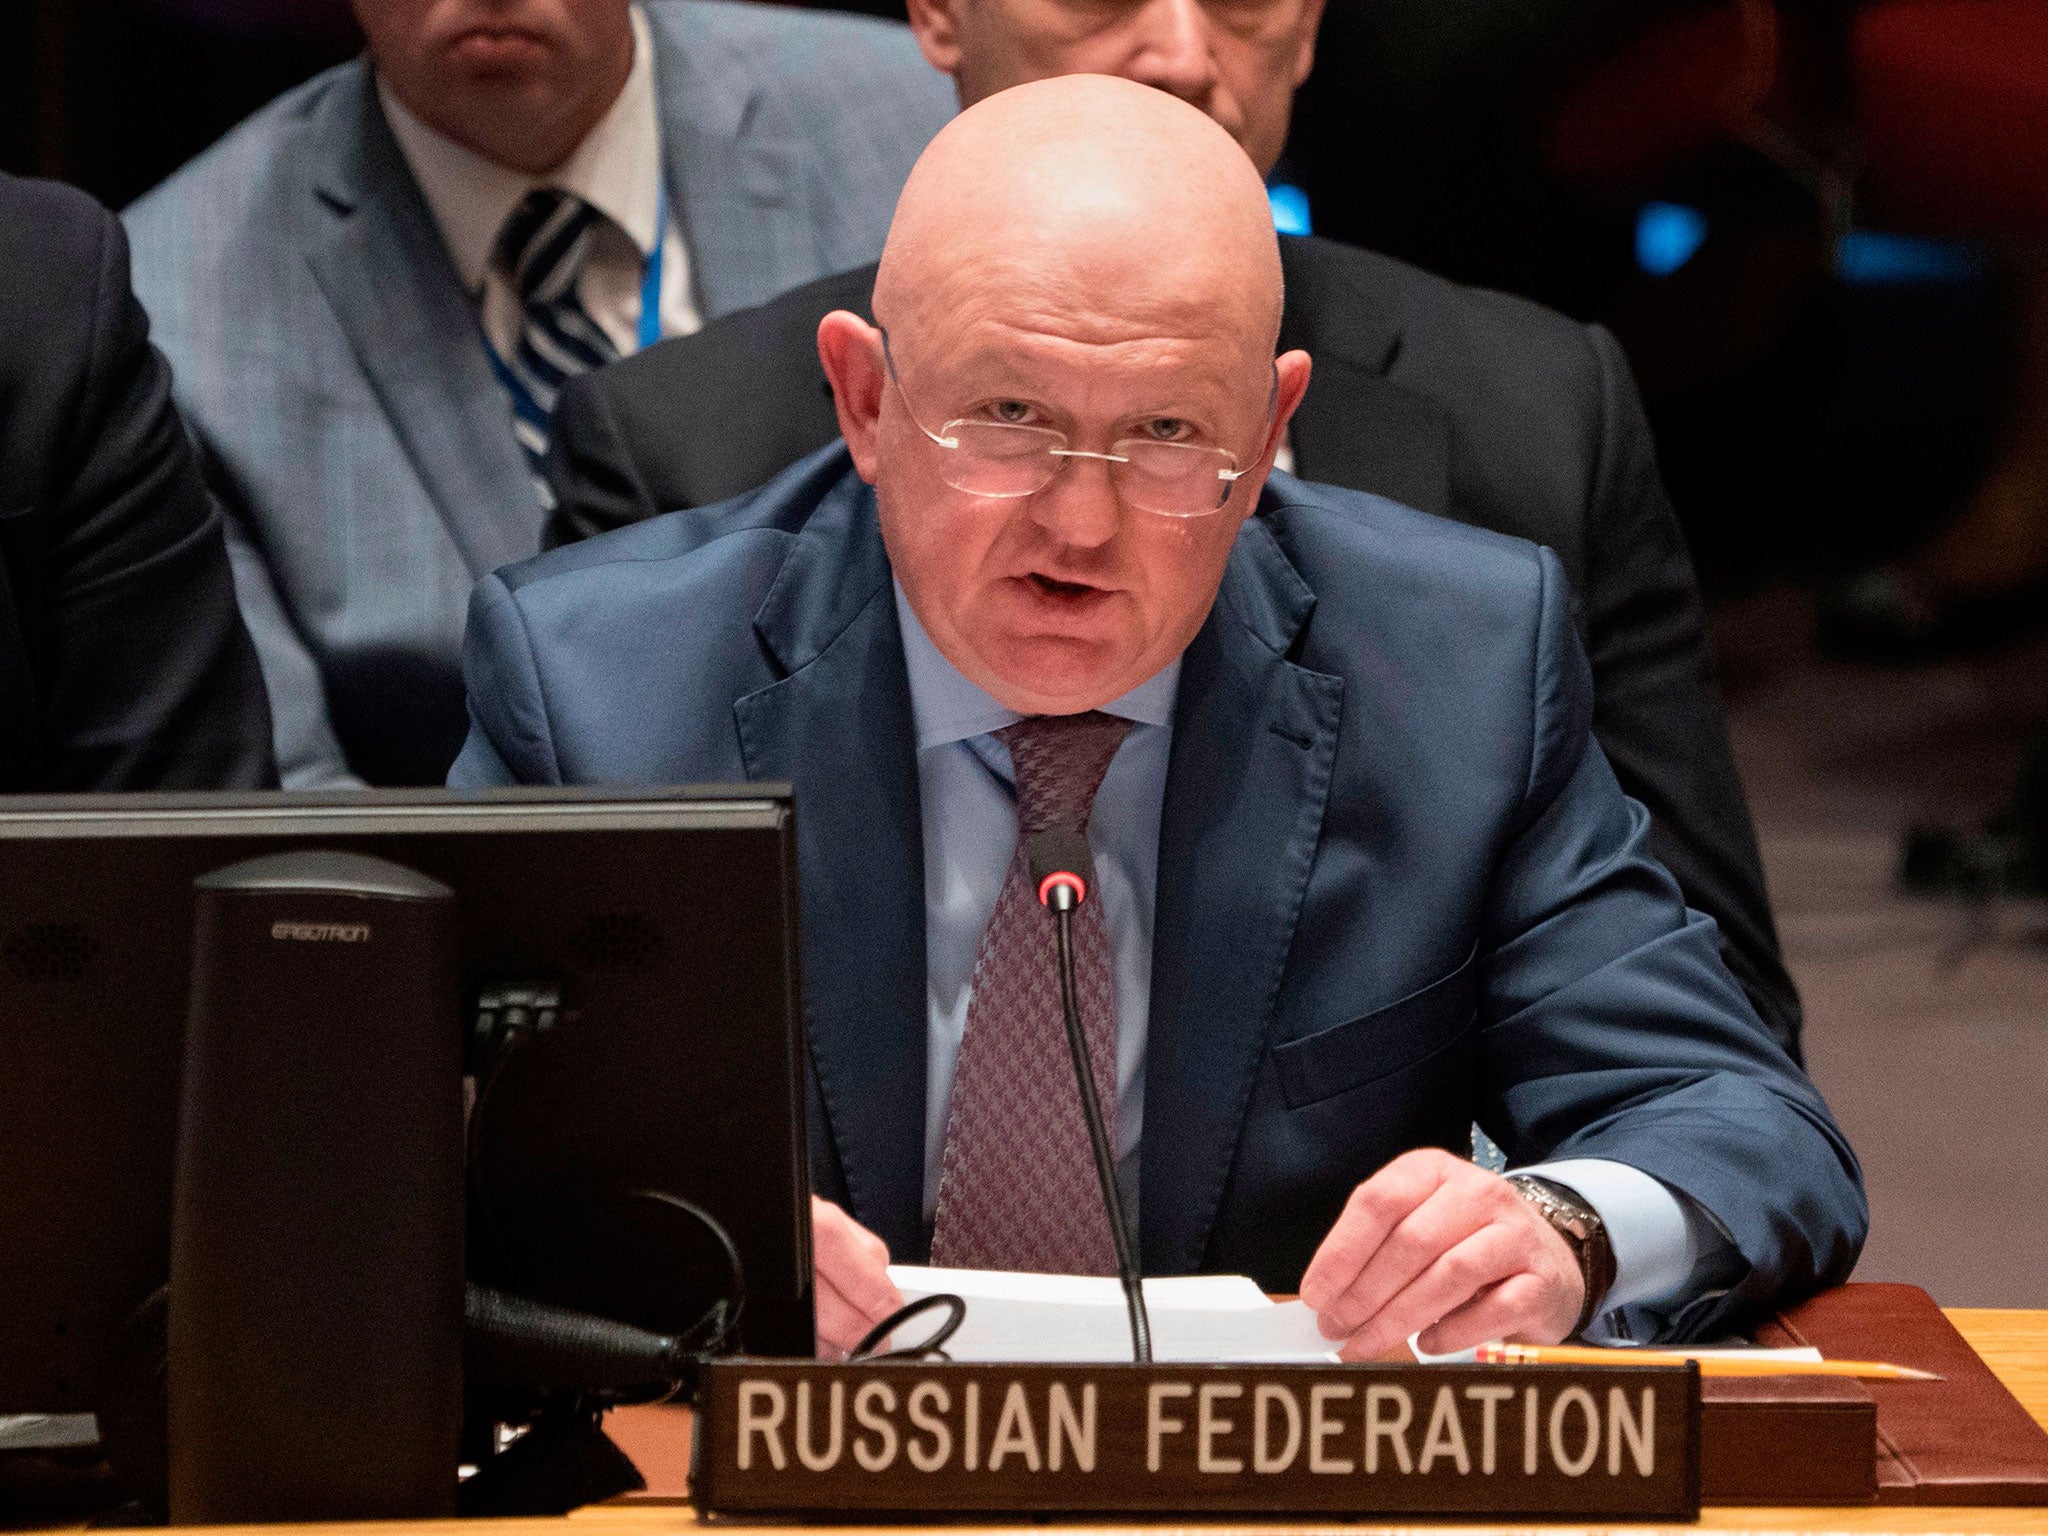 The Russian ambassador to the UN, Vassily Nebenzia, discusses threats to international peace and security at an emergency Security Council session